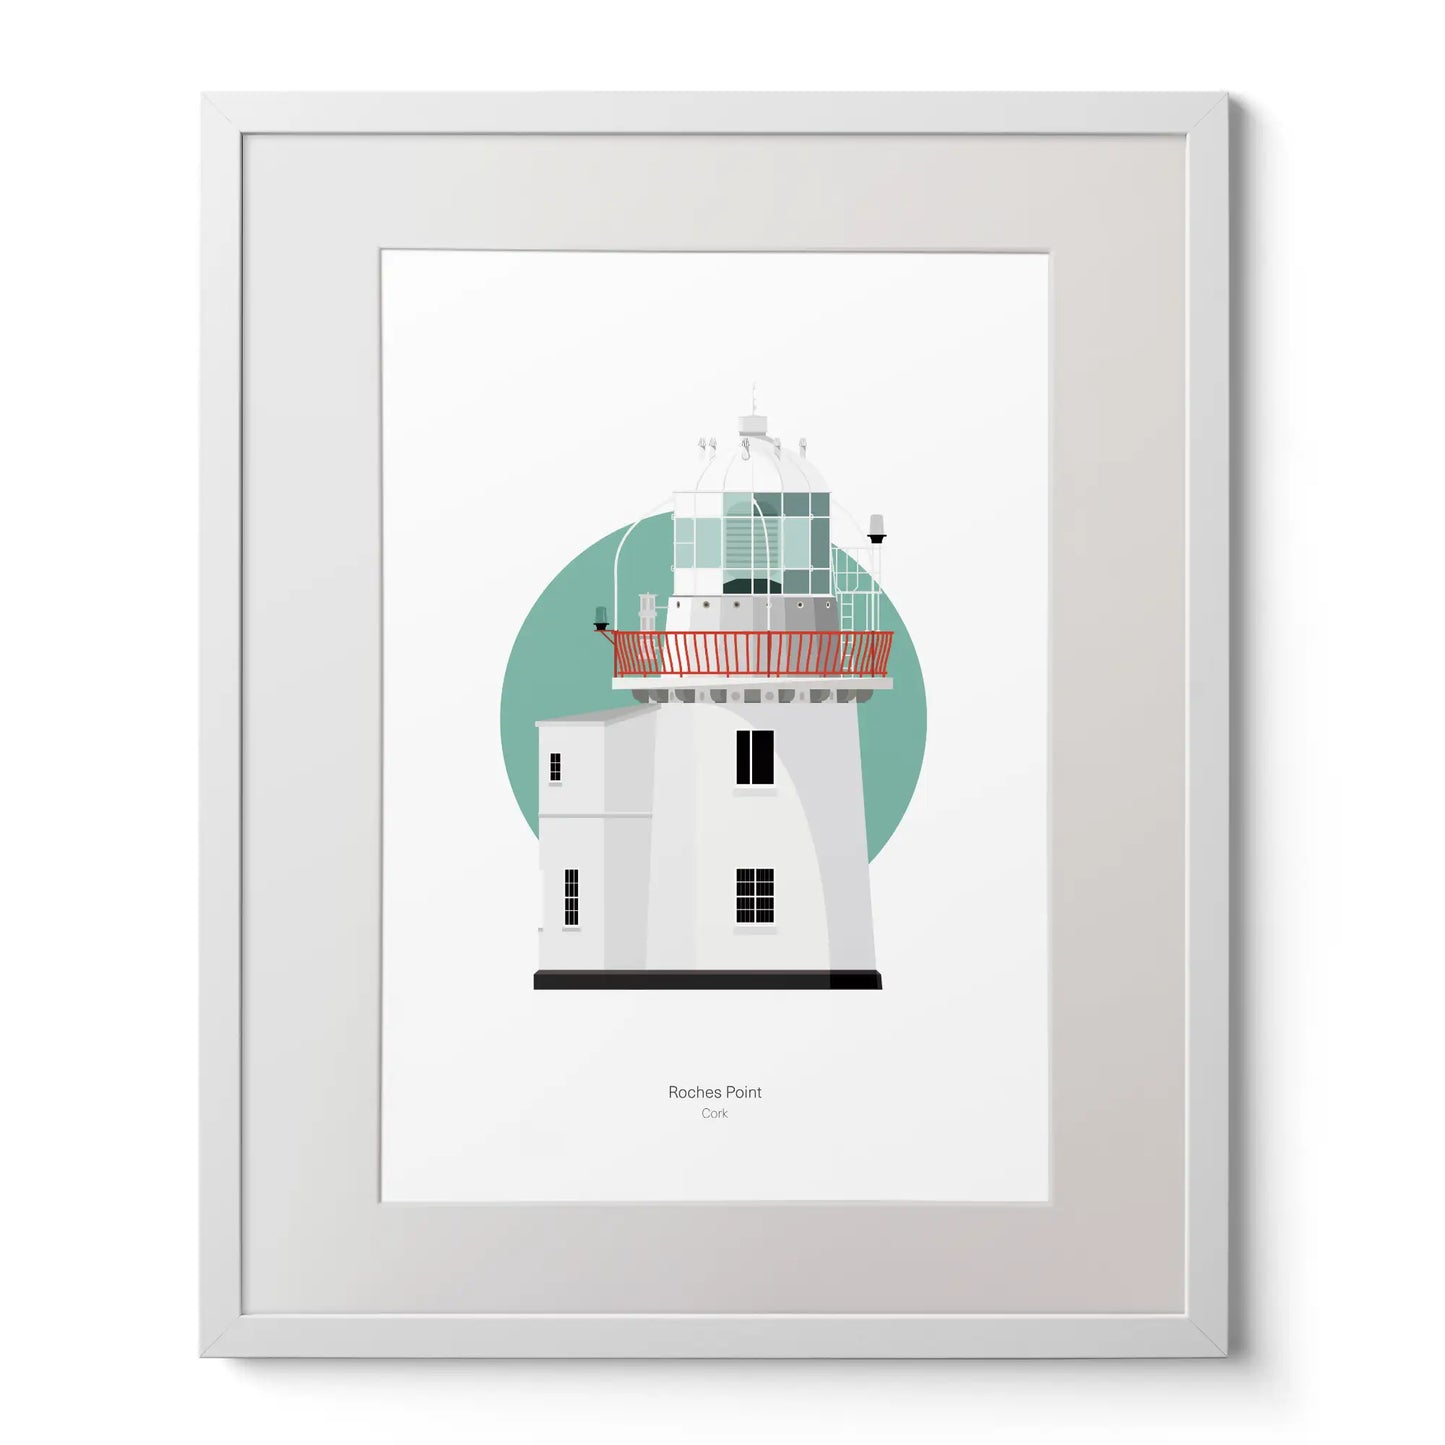 Illustration of Roches Point lighthouse on a white background inside light blue square,  in a white frame measuring 40x50cm.